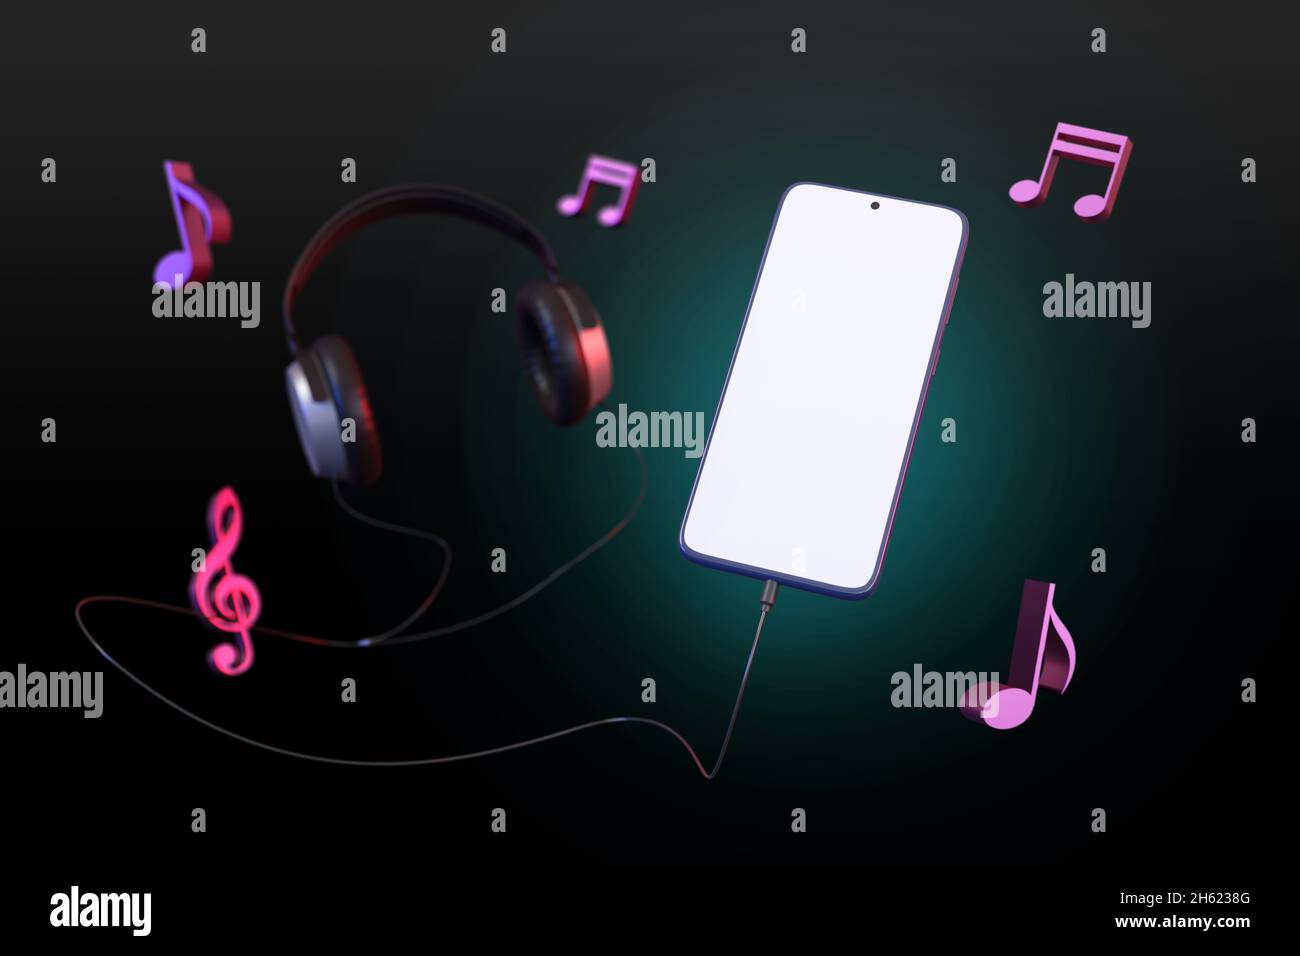 Mobile phone with blank screen, microphone and headphones isolated on dark background. Music concept. 3d illustration. Stock Photo